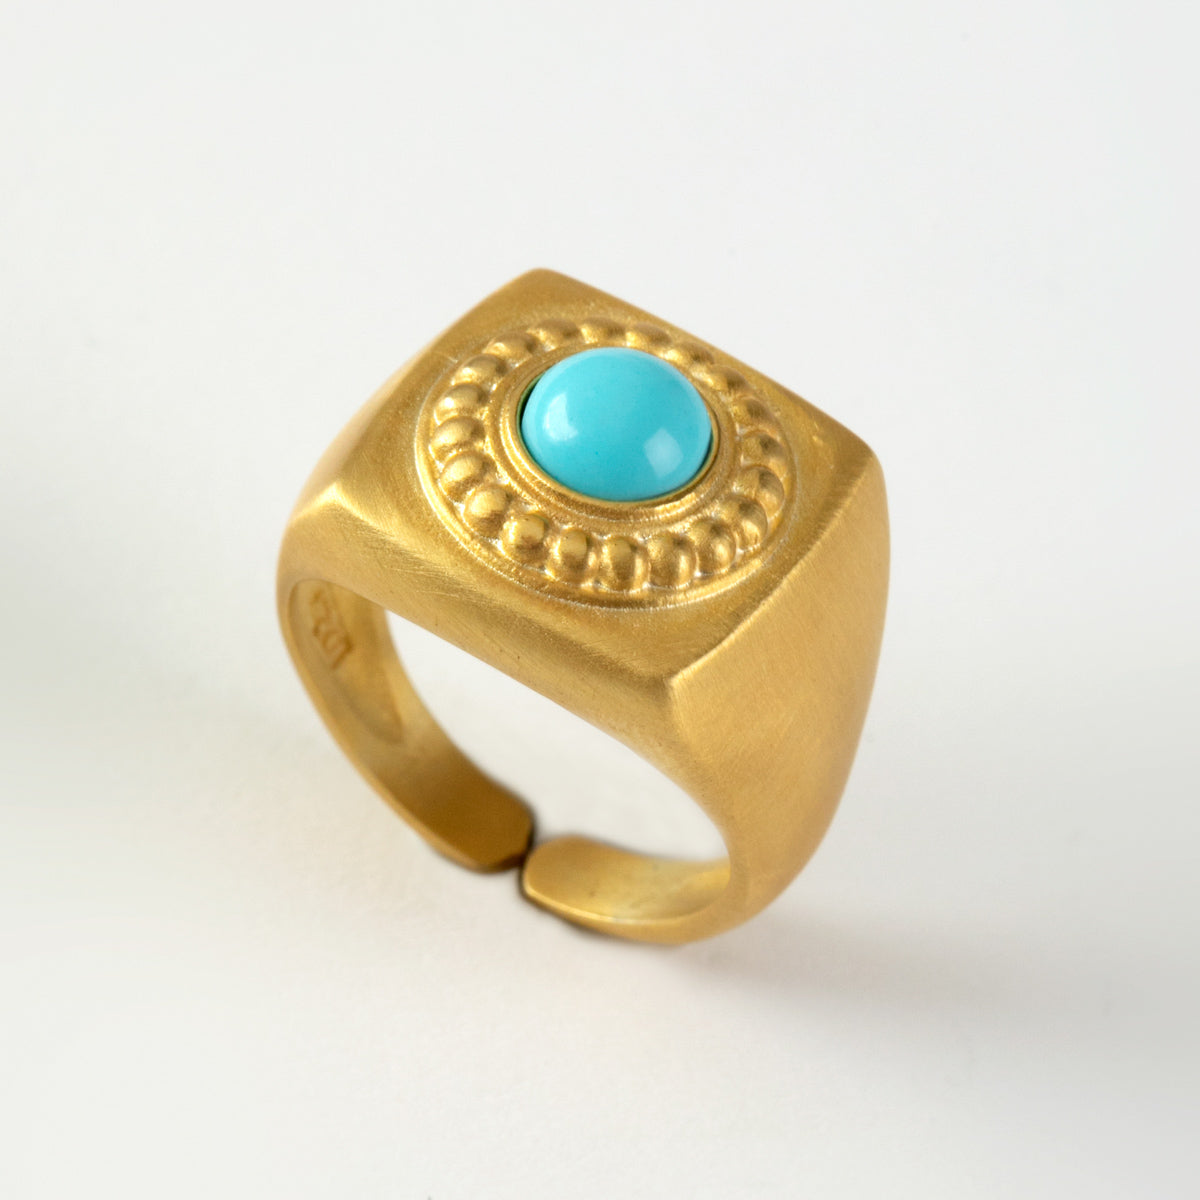 Athena Turquoise ring, silver 925° gold plated 22k by Pearl Martini